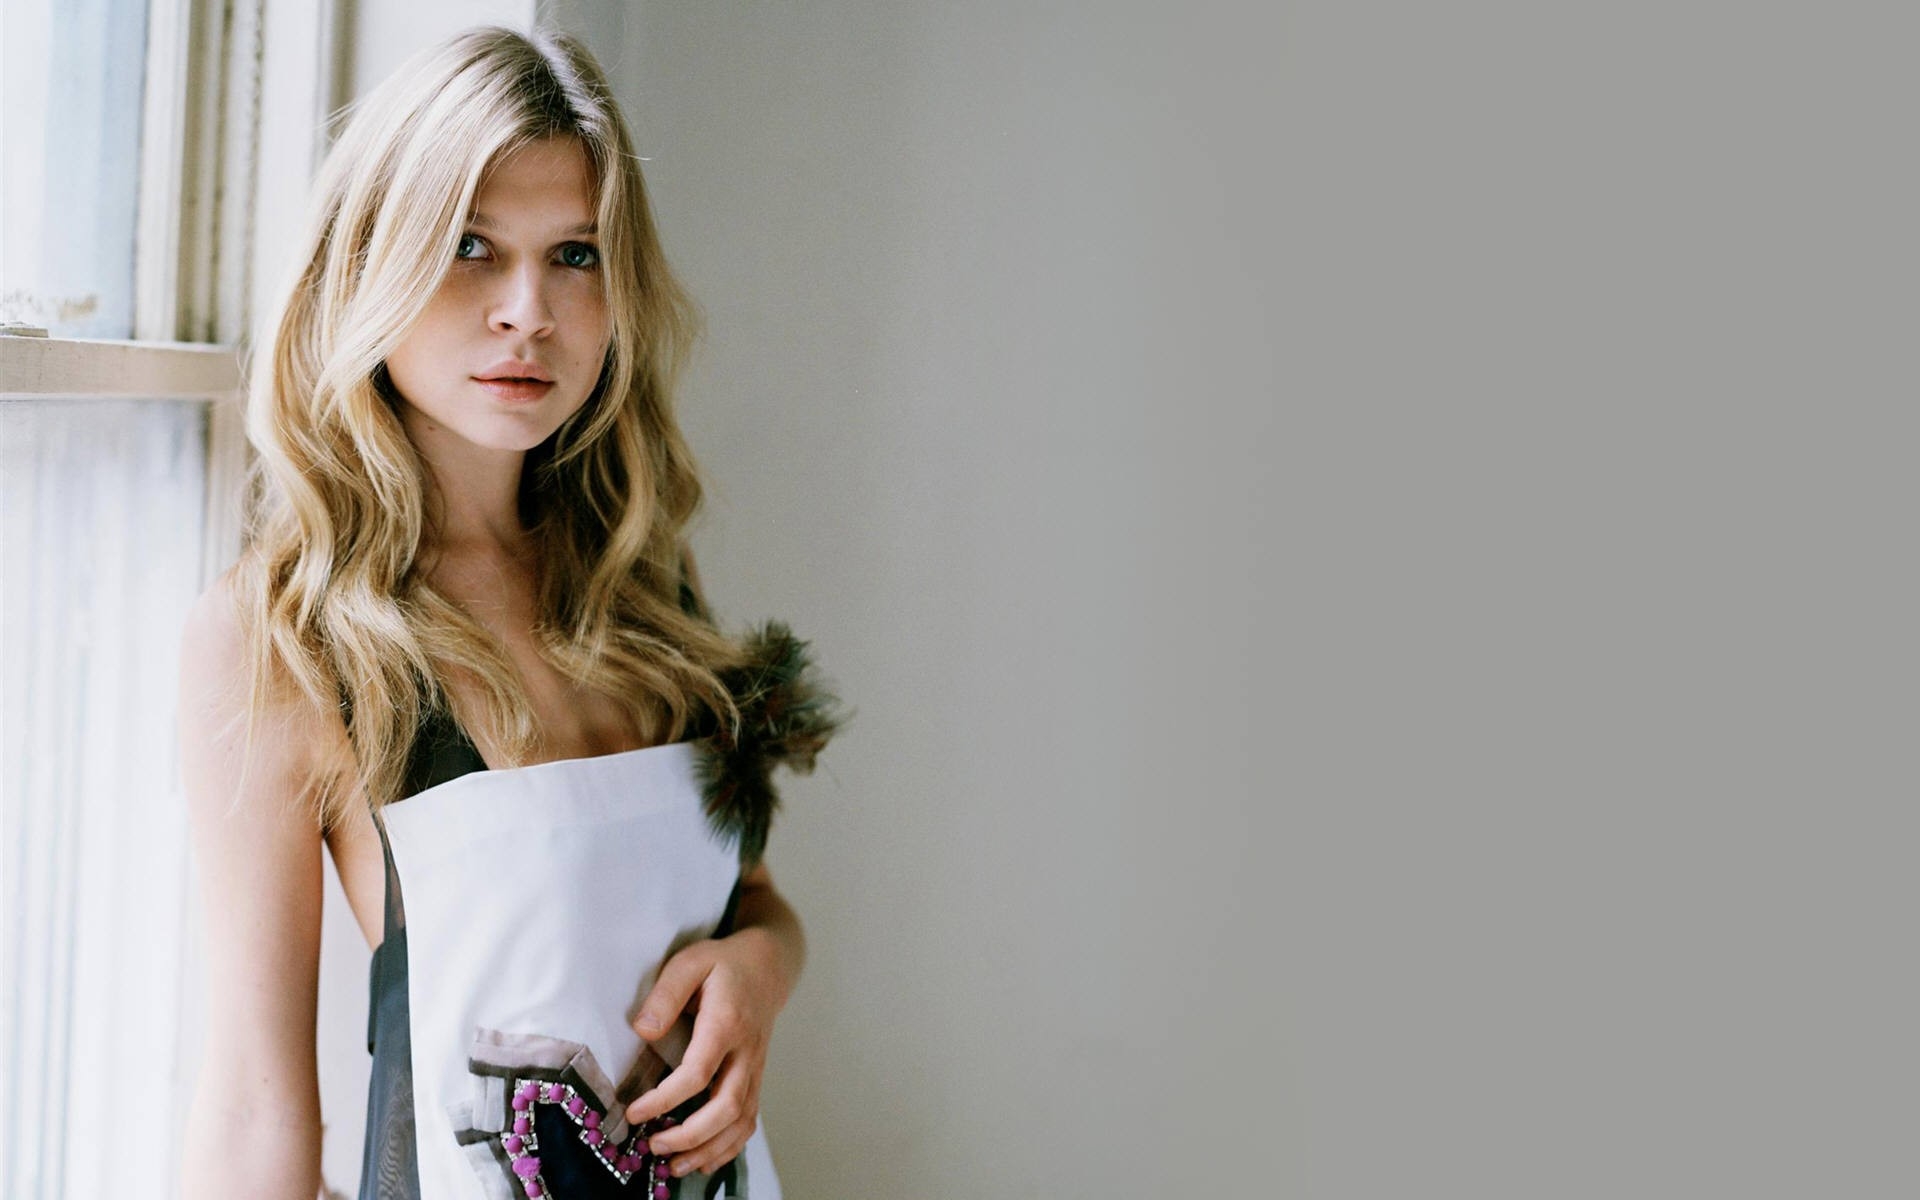 Clemence Poesy Actress 1920x1200